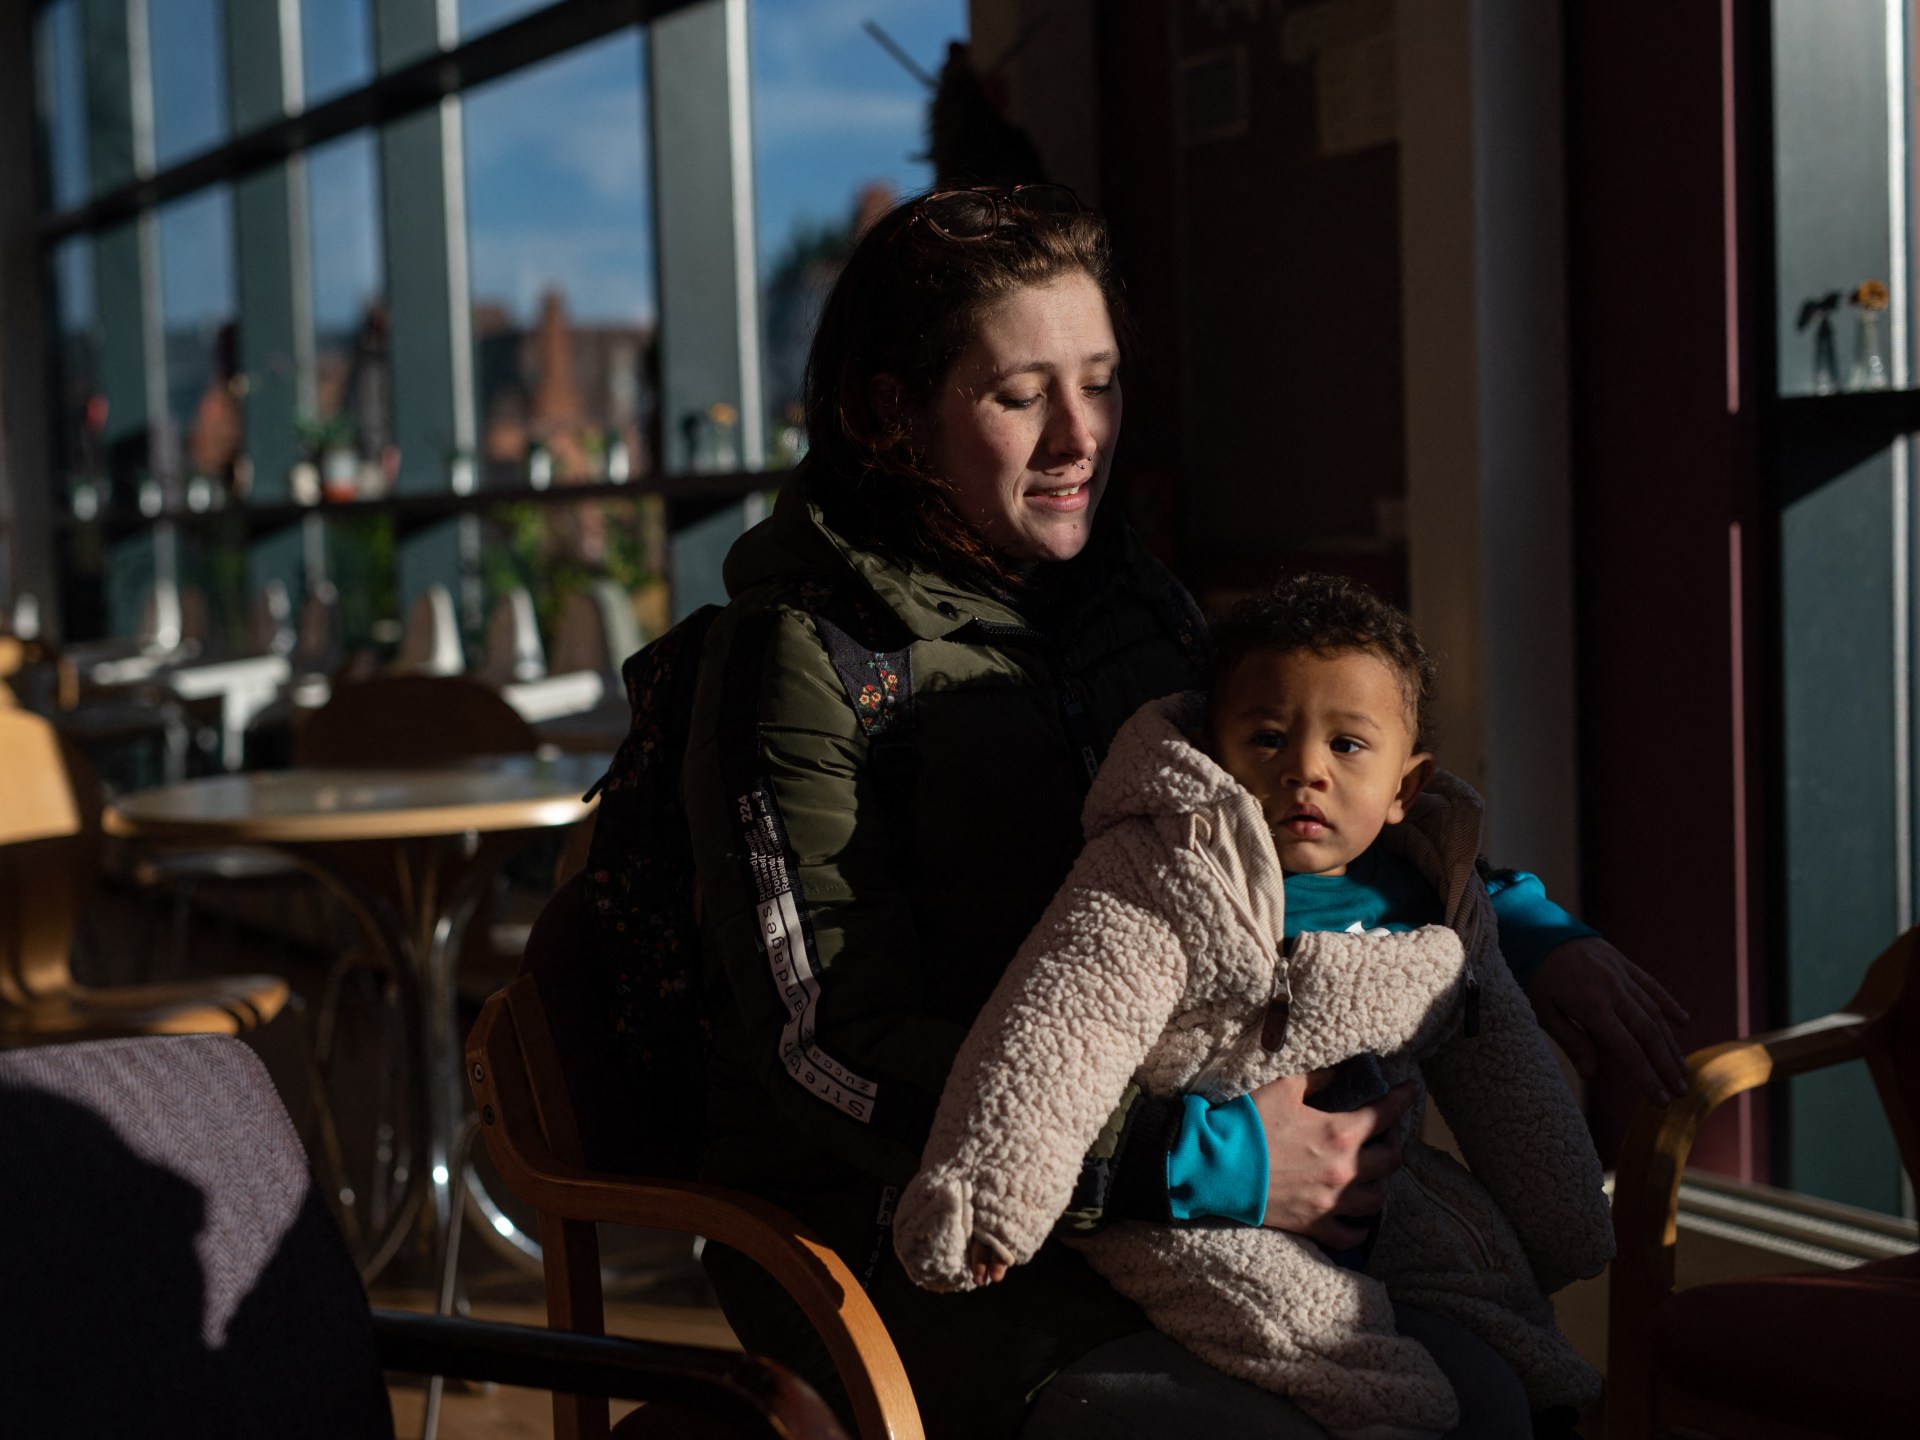 UK cost-of-living crisis pushes mothers to the brink